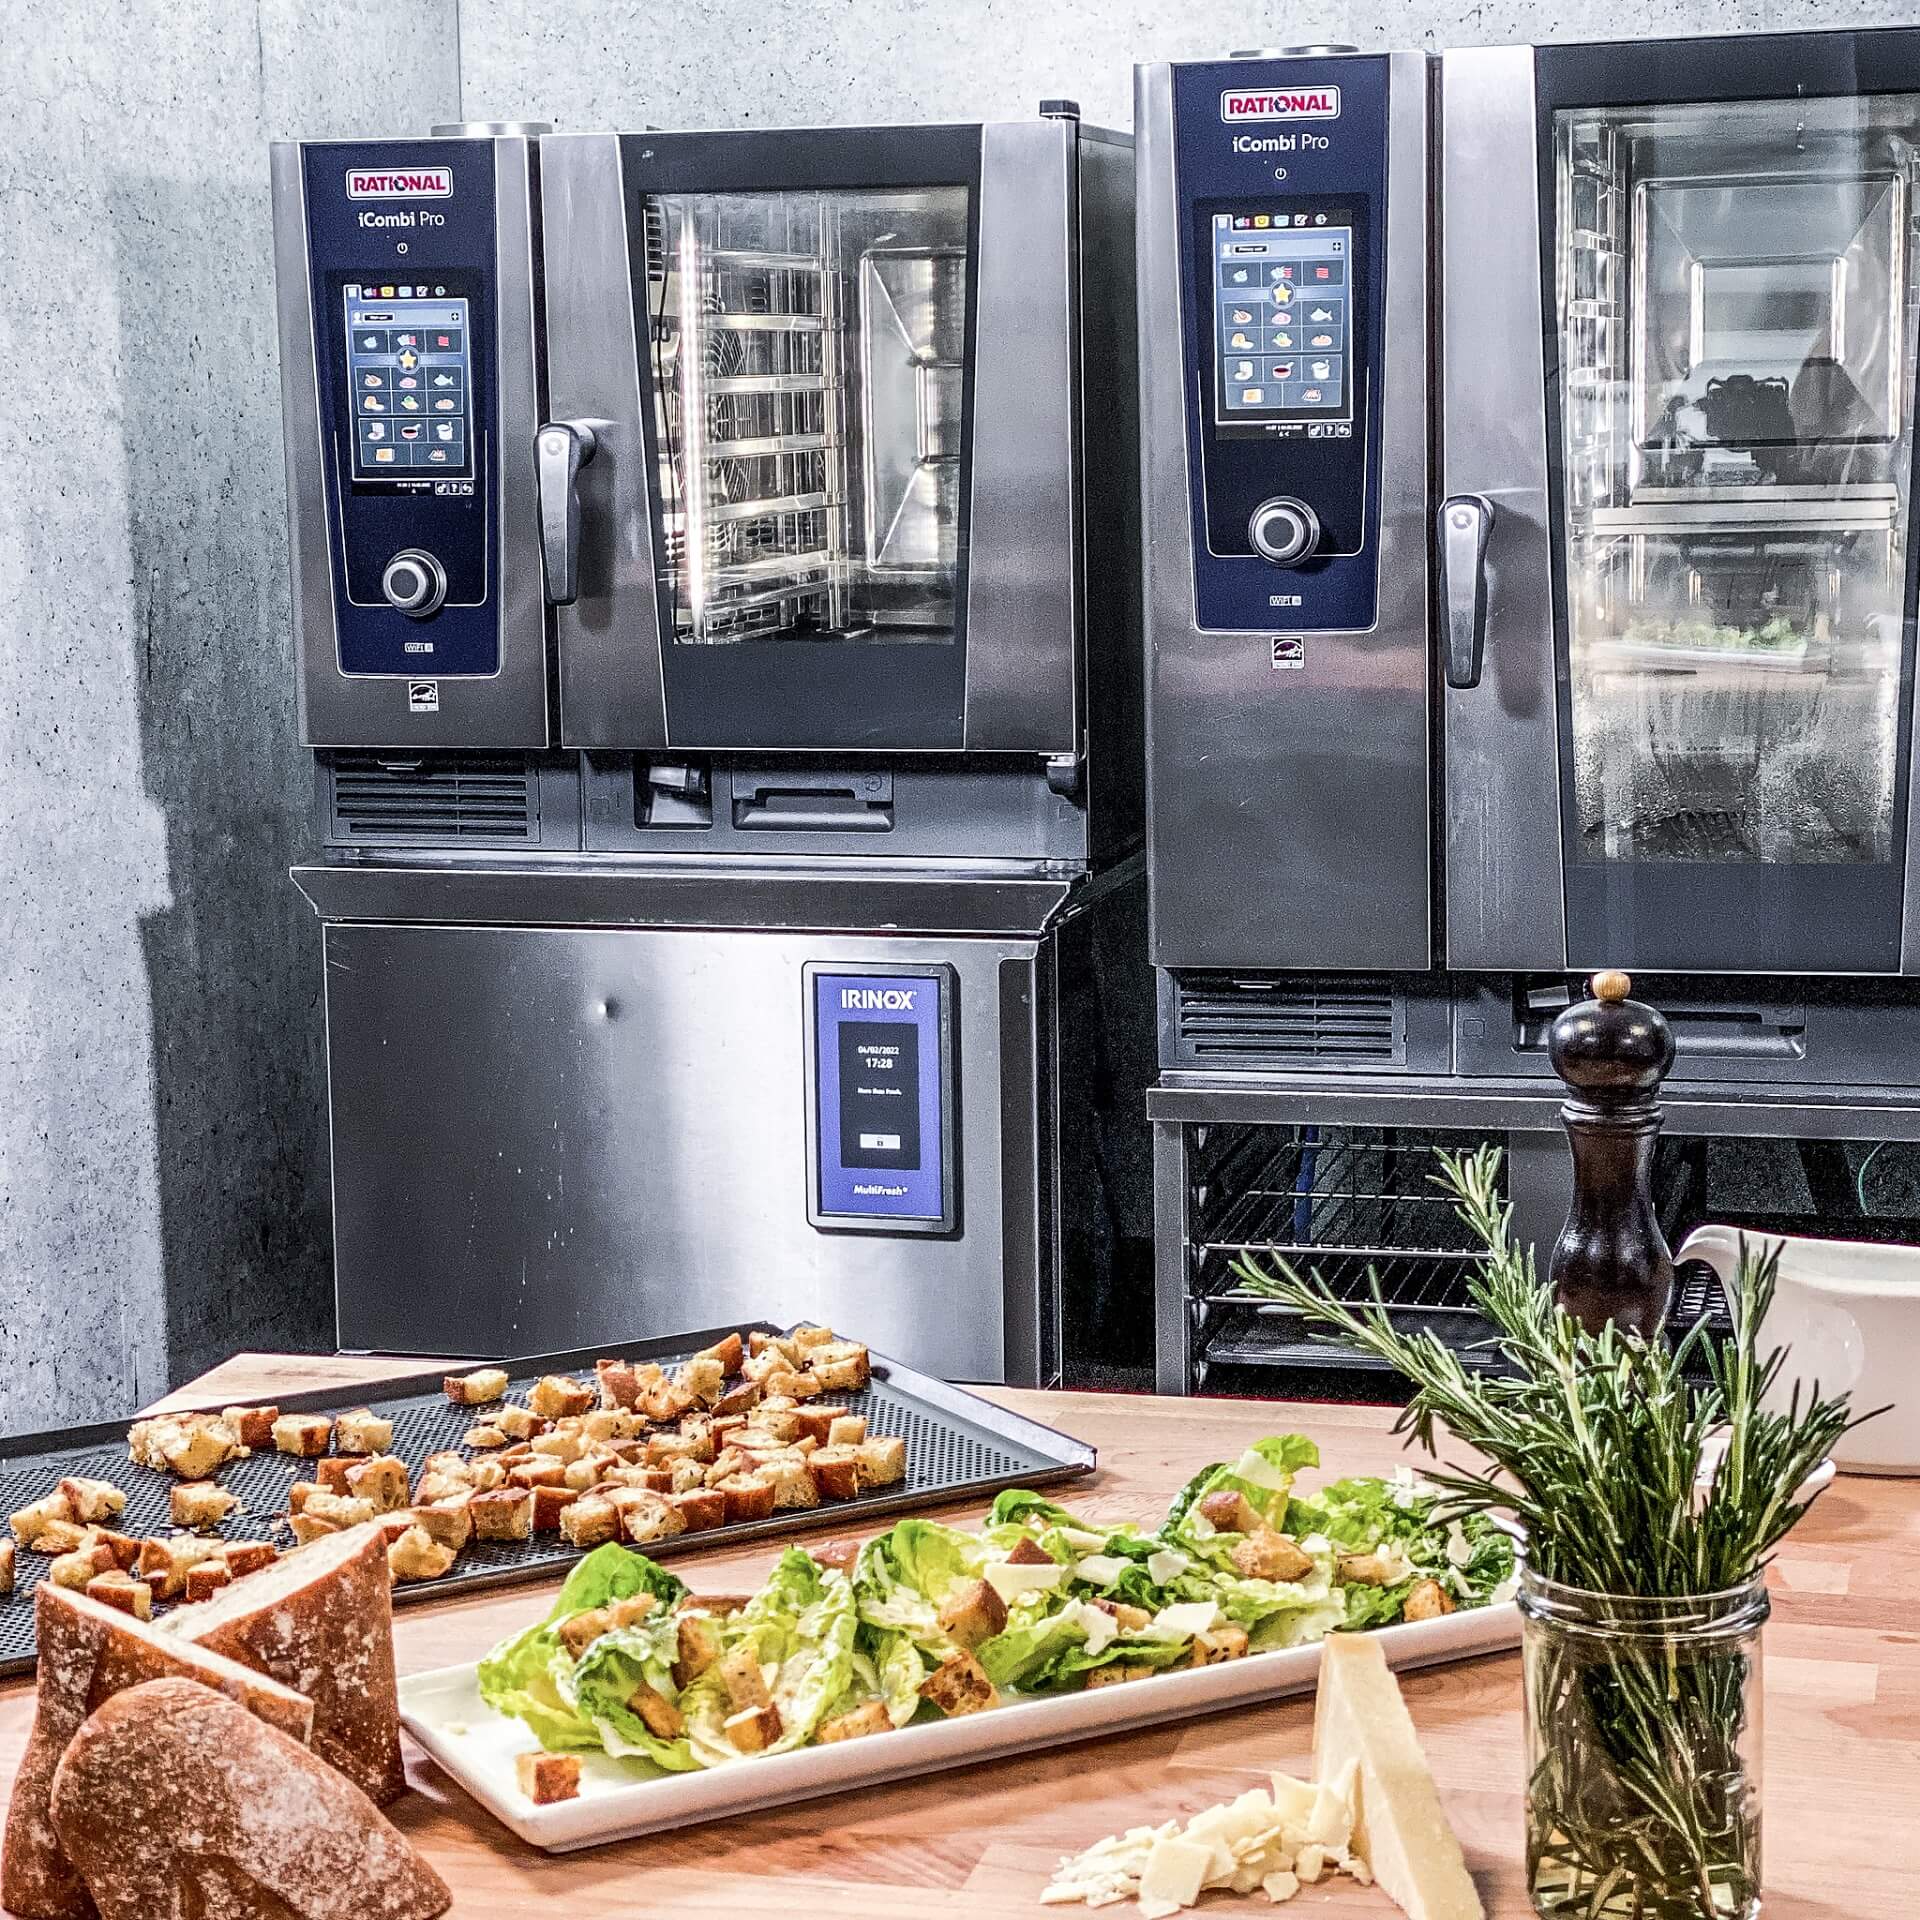 Intelligent cooking systems from Rational